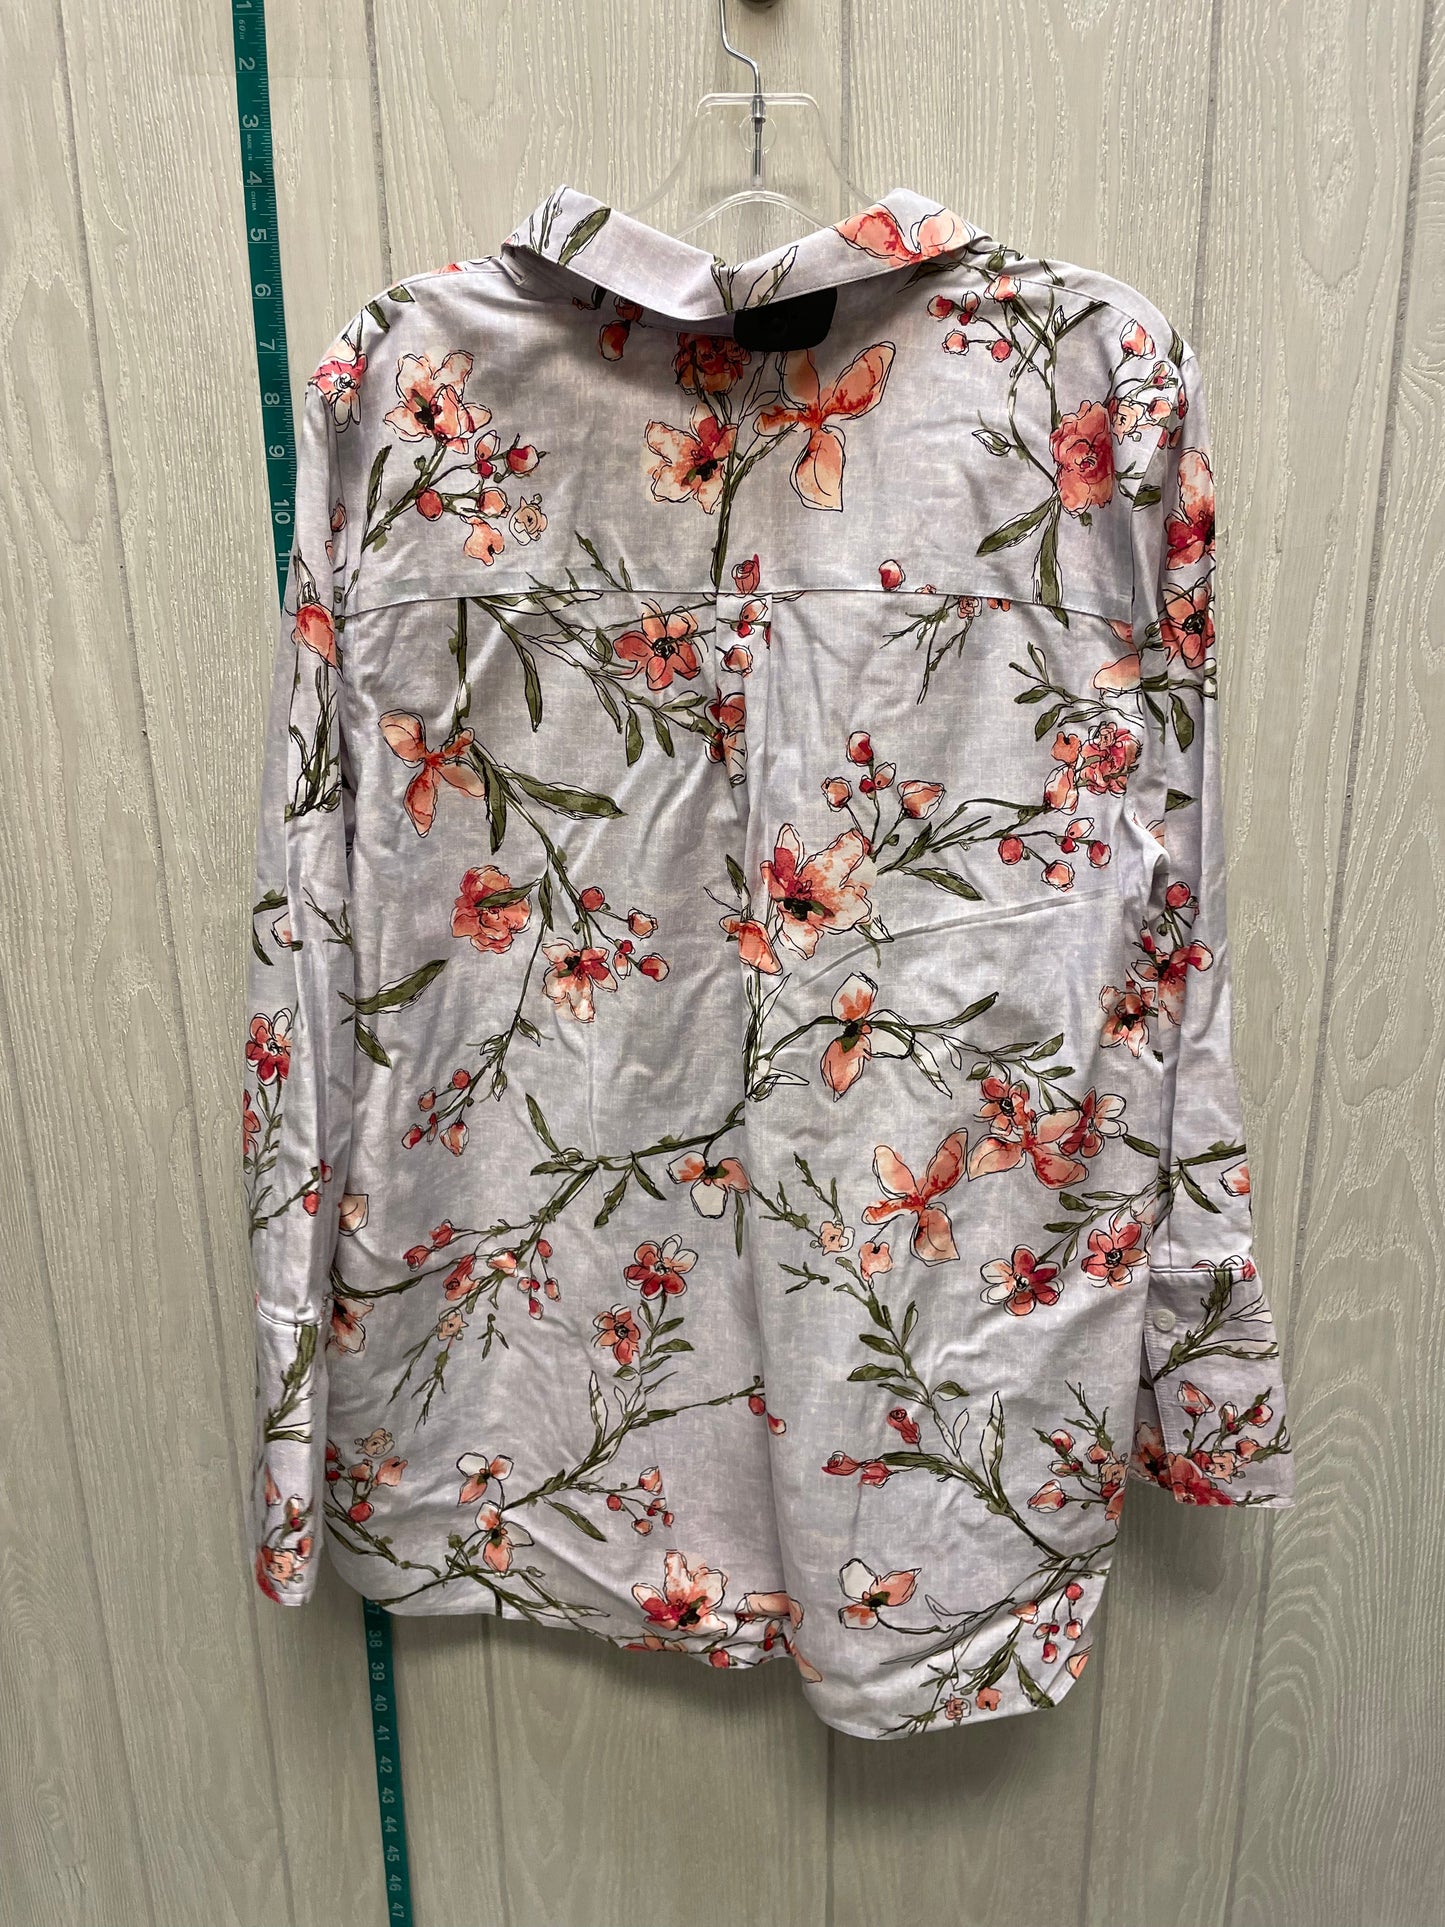 Floral Print Blouse Long Sleeve Chicos, Size 1x